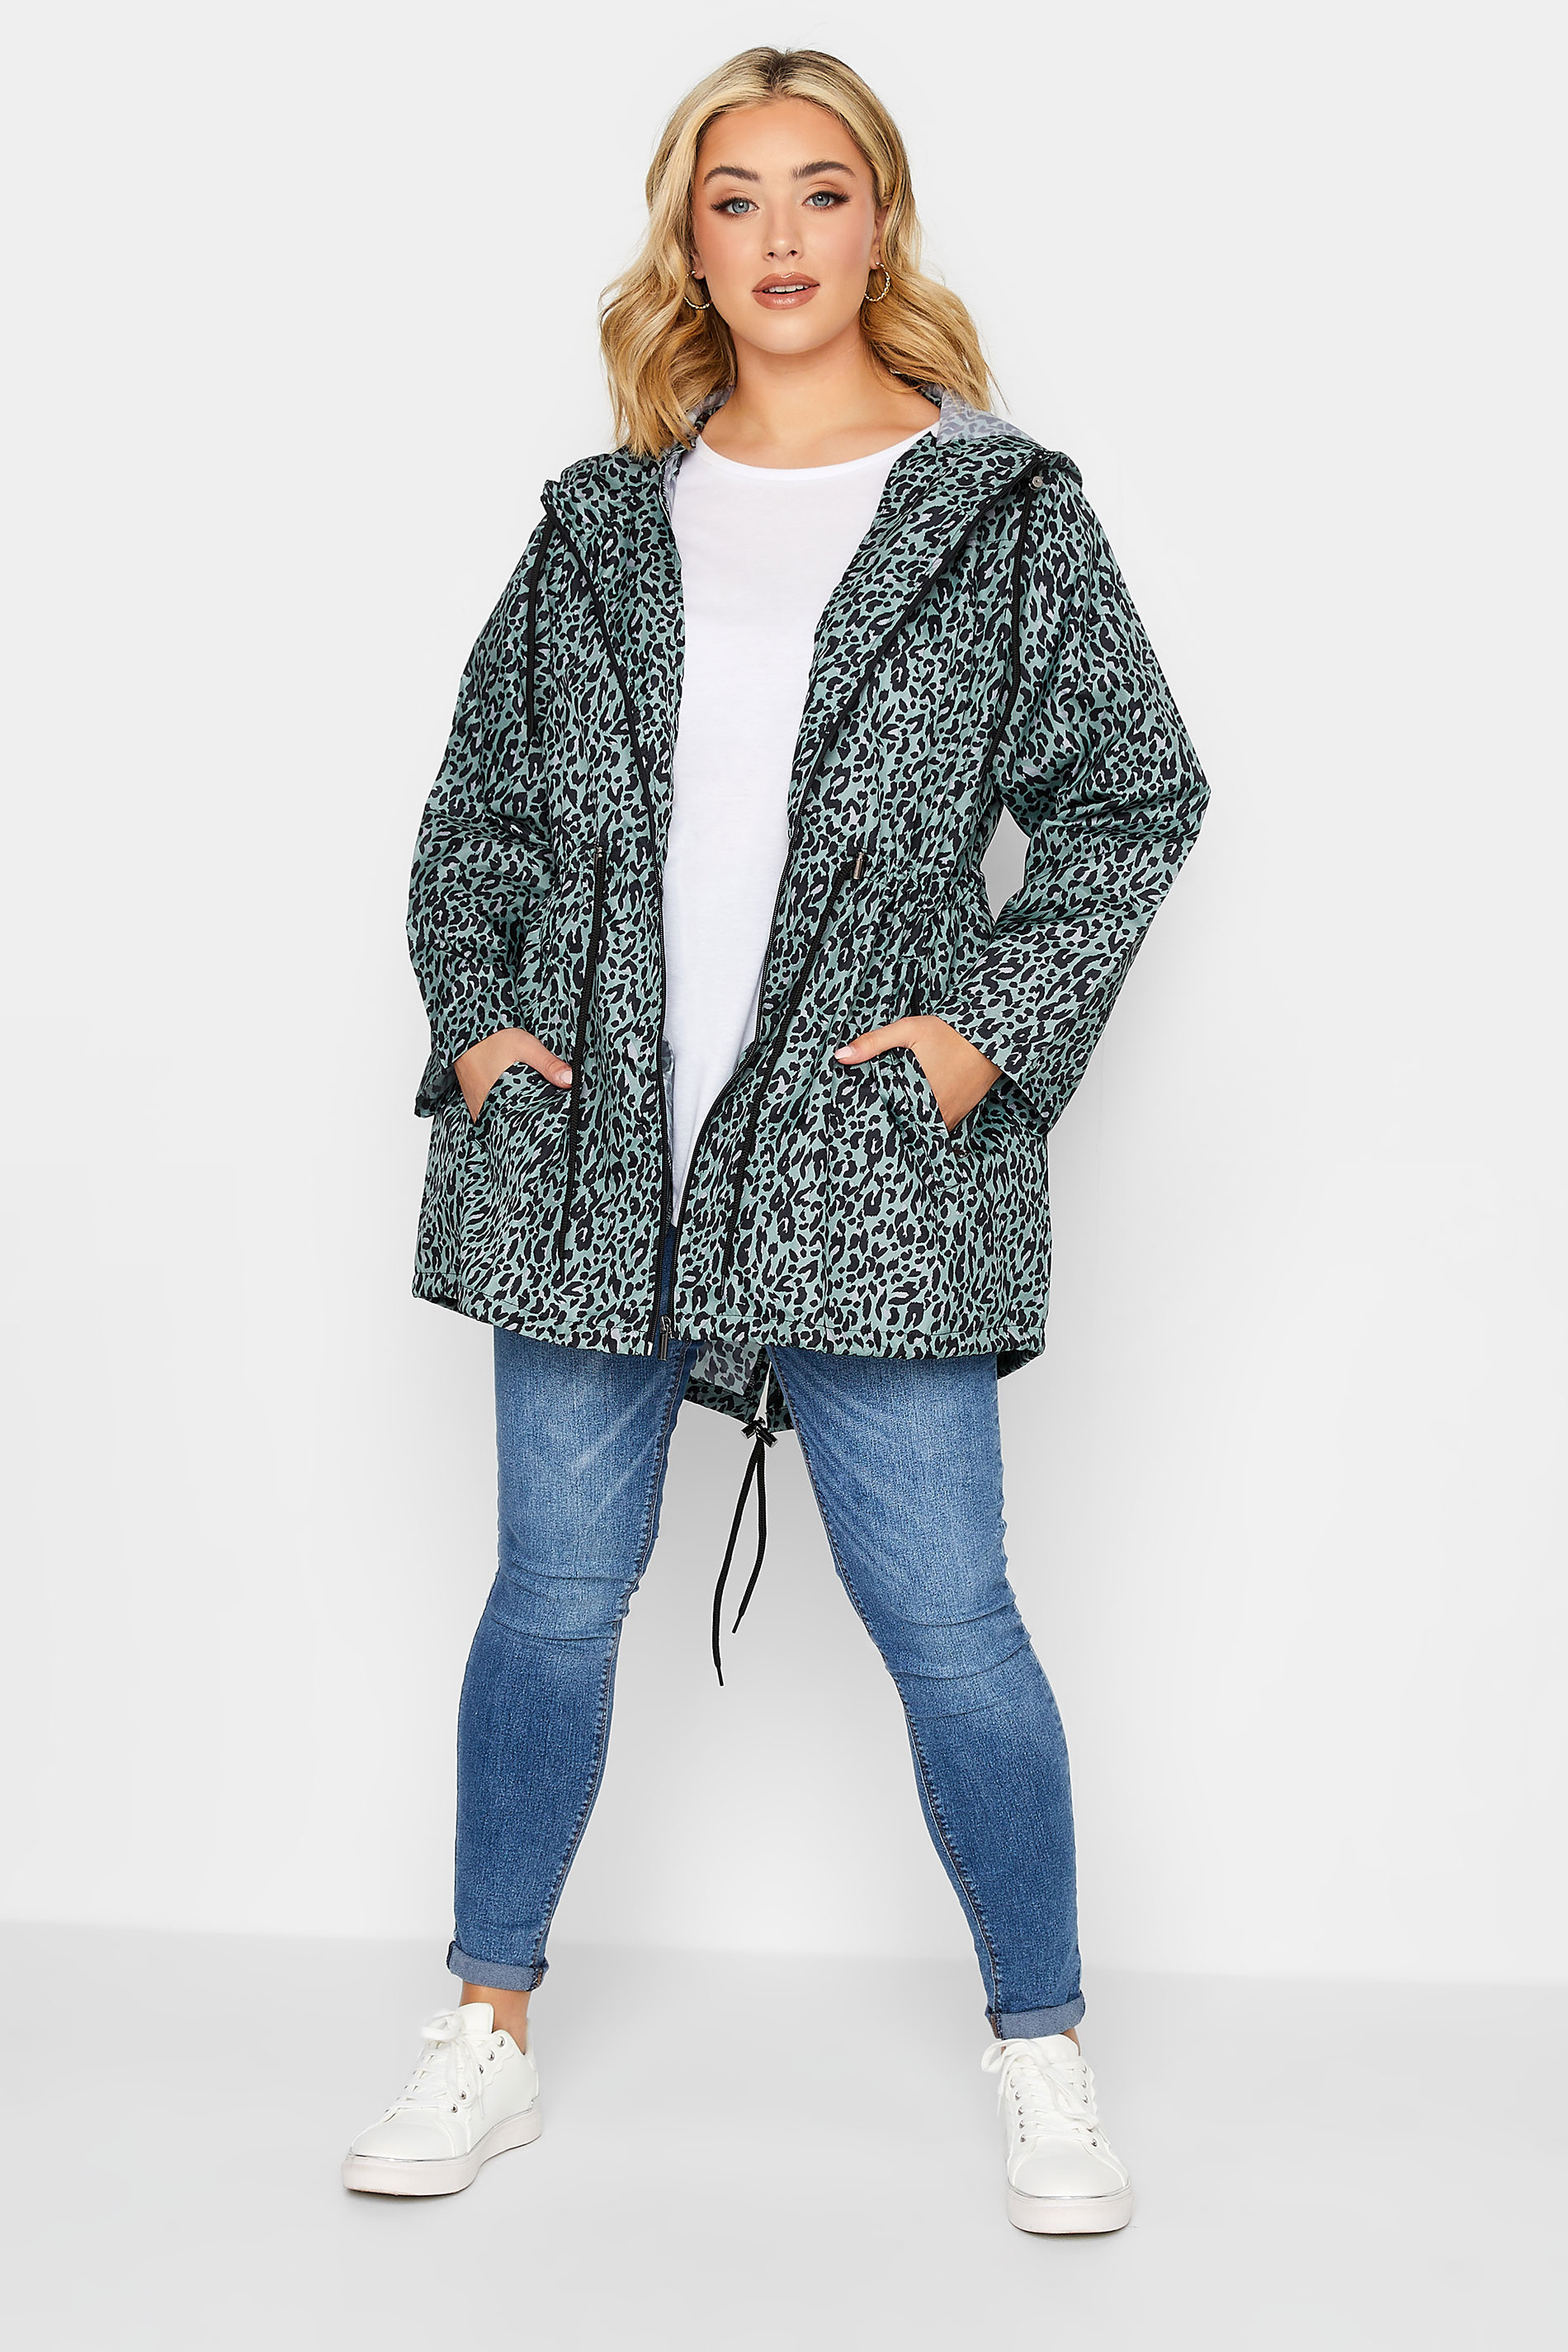 YOURS PETITE Plus Size Green Leopard Print Pocket Parka | Yours Clothing 2